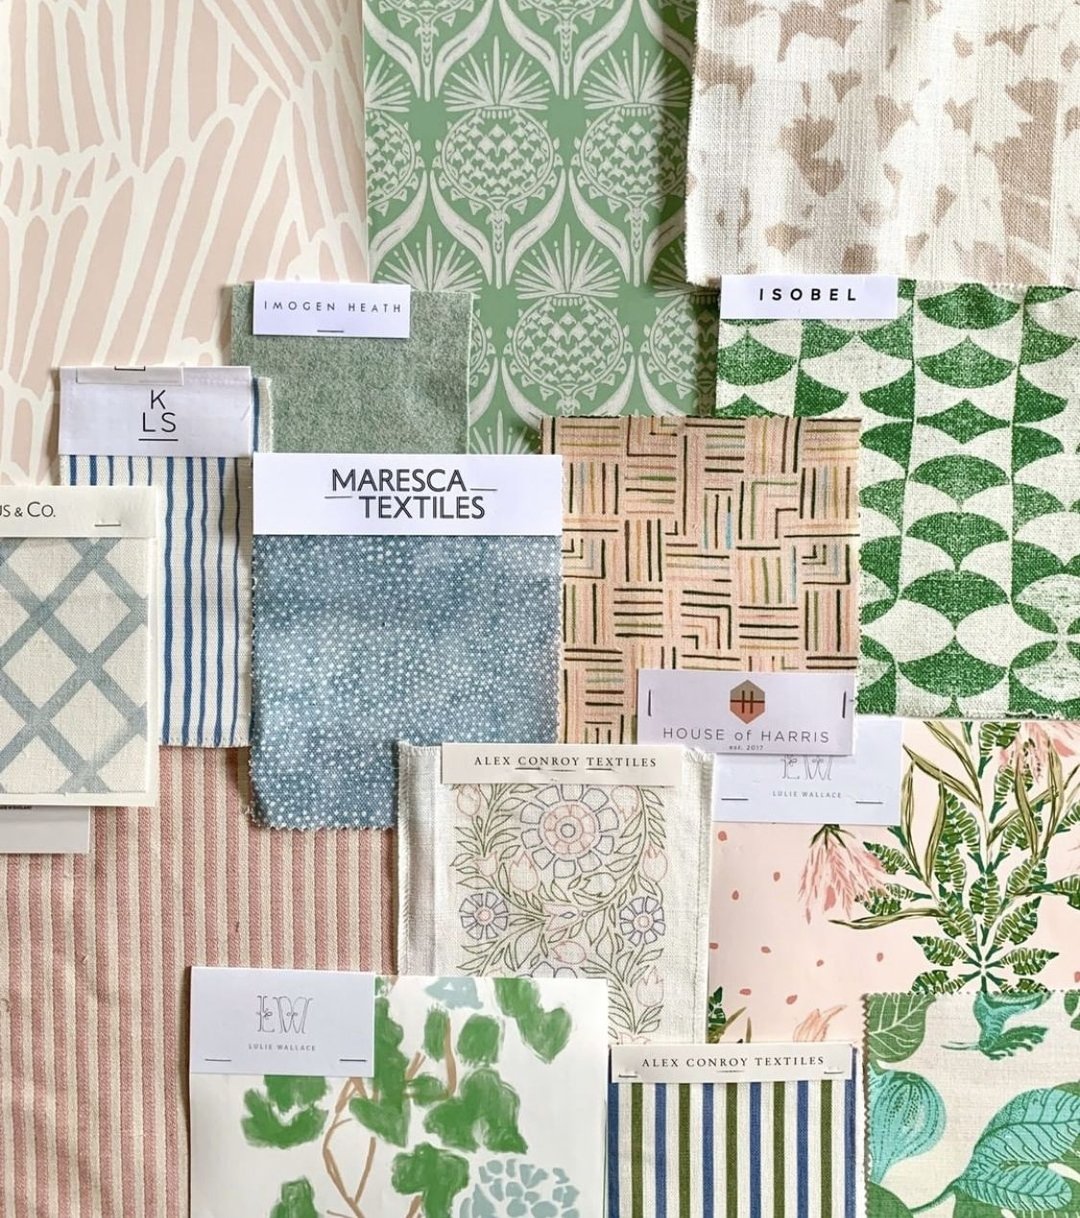 Materials matter, and fabrics help layer visual interest in a space. By coordinating complementary patterns and colors, you can craft a narrative of balanced abundance. Executed thoughtfully, more can be more.

XKED

@houseofharrisllc
@shopisobel
@ma